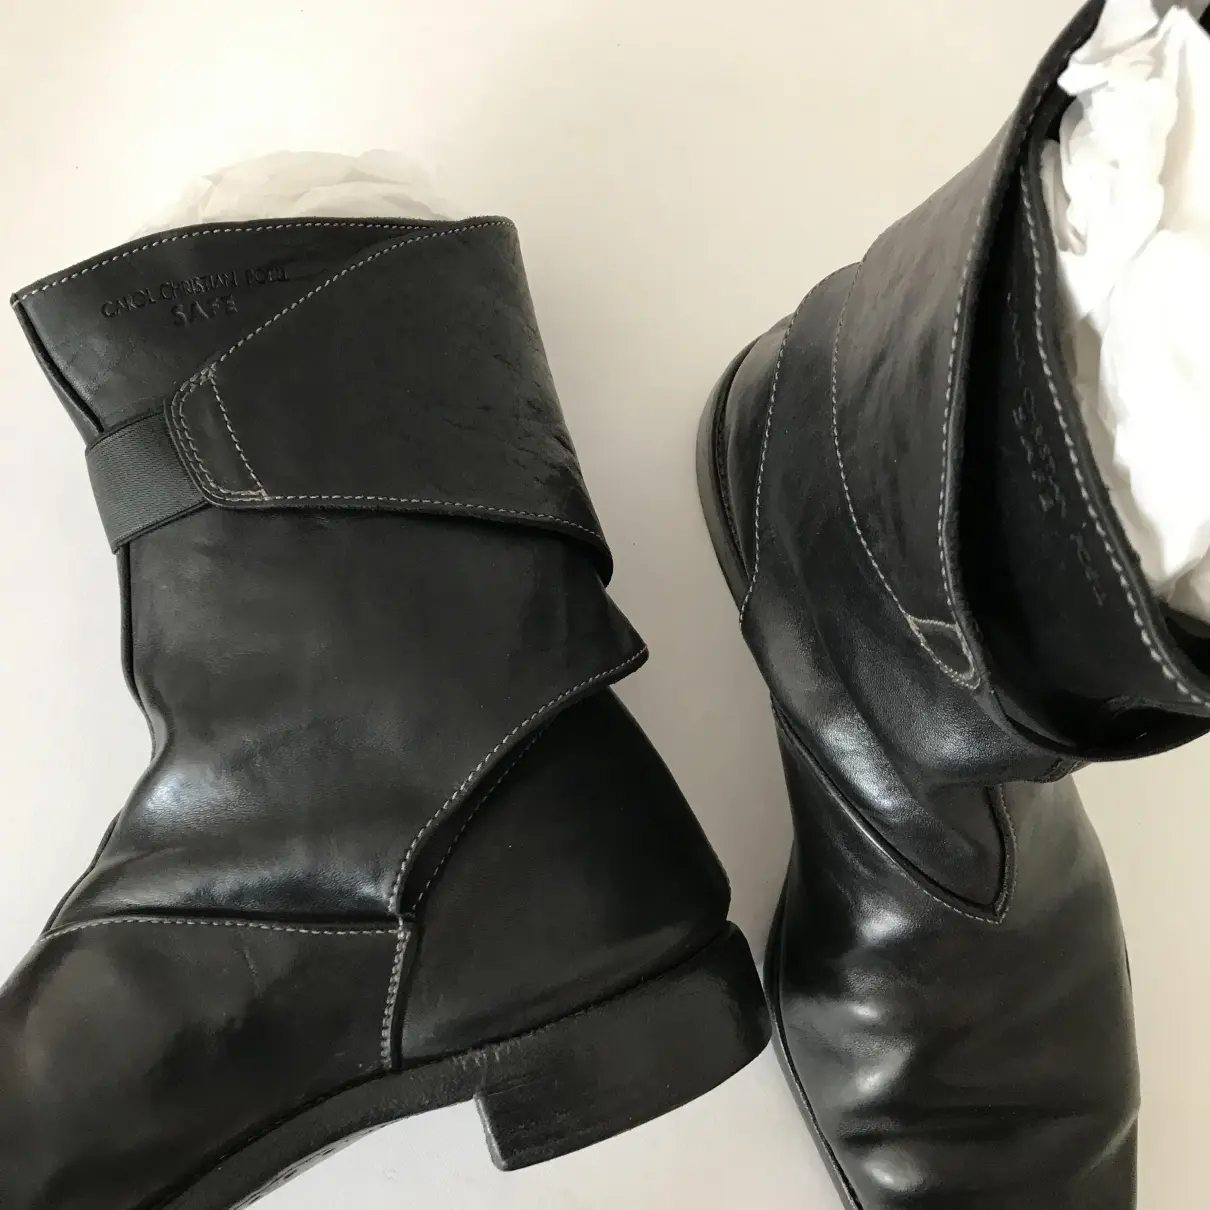 Leather boots Carol Christian Poell